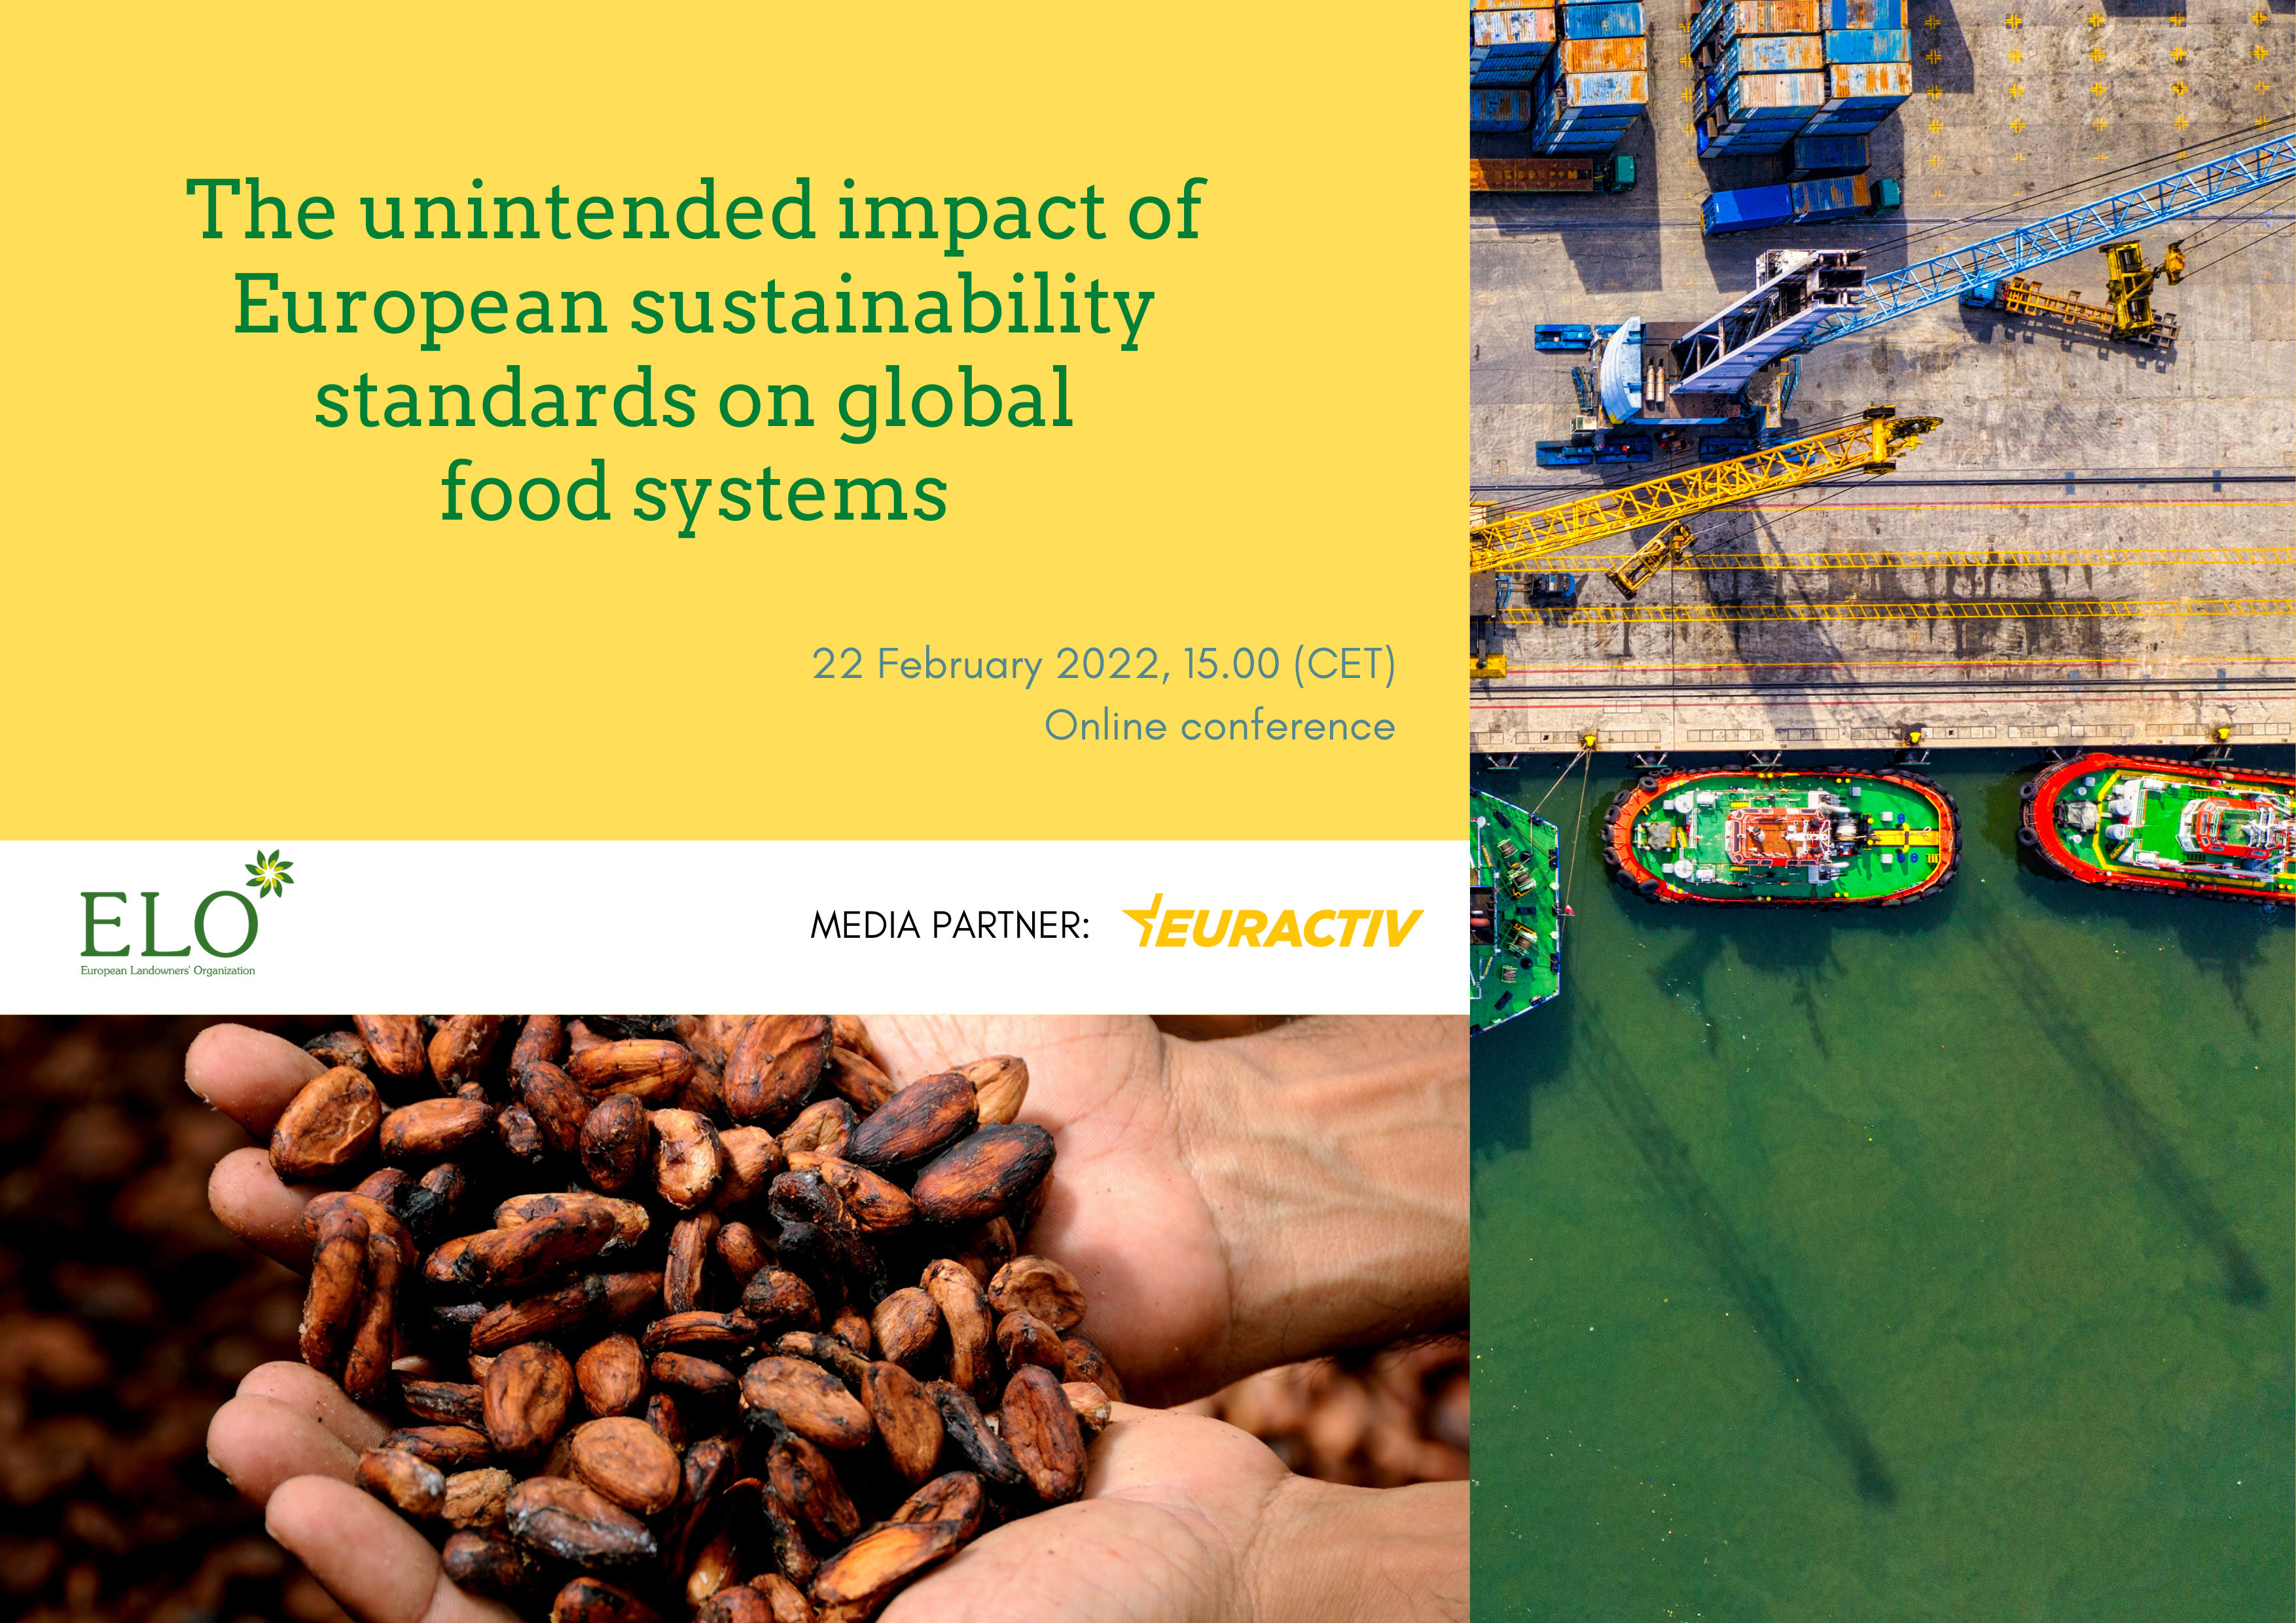 Media Partnership: The unintended impact of European sustainability standards on global food systems